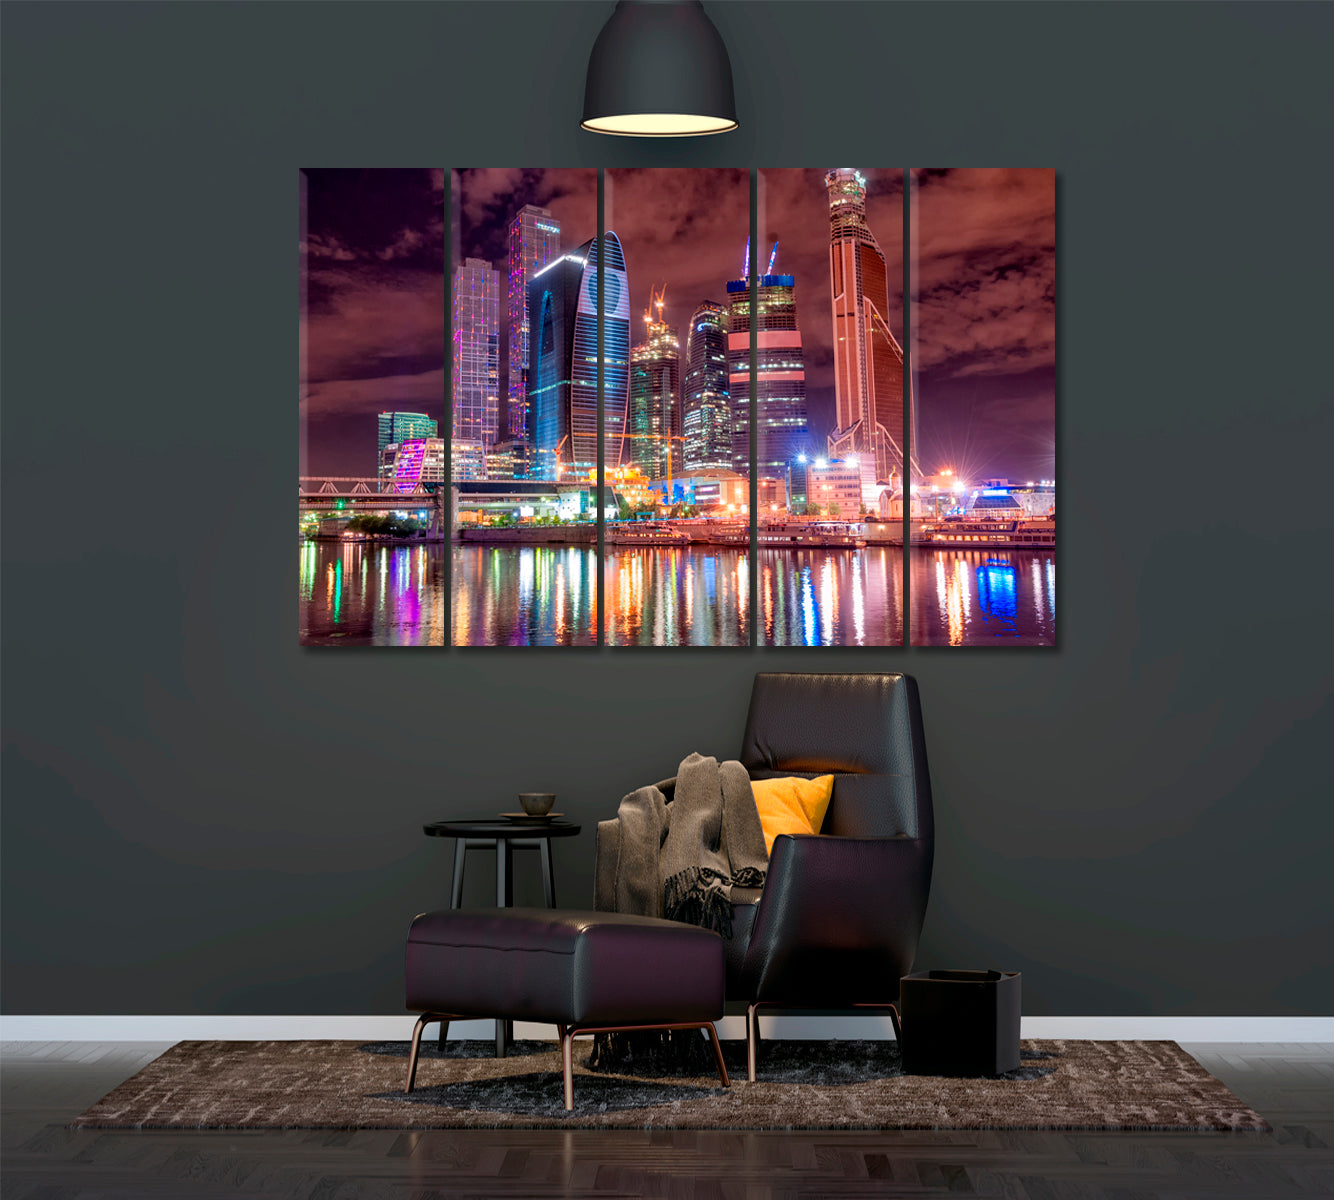 Moscow City at Night Canvas Print ArtLexy 5 Panels 36"x24" inches 